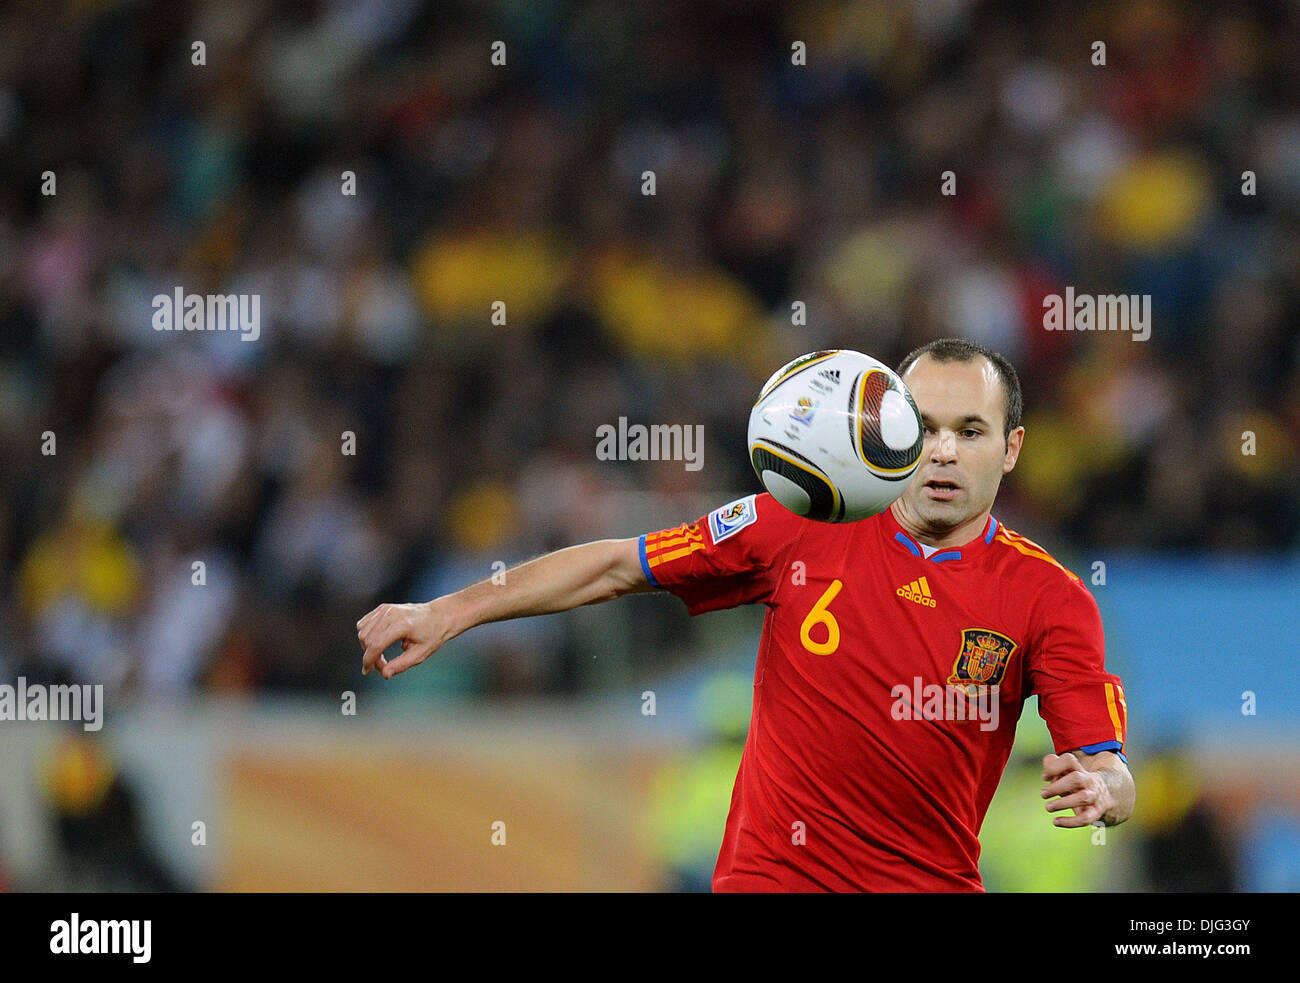 July 07, 2010 - Durban, South Africa - Andres Iniesta of Spain eyes the ball during the 2010 FIFA World Cup Semi Final soccer match between Germany and Spain at Princess Magogo Stadium on July 7, 2010 in Durban, South Africa. (Credit Image: © Luca Ghidoni/ZUMApress.com) Stock Photo